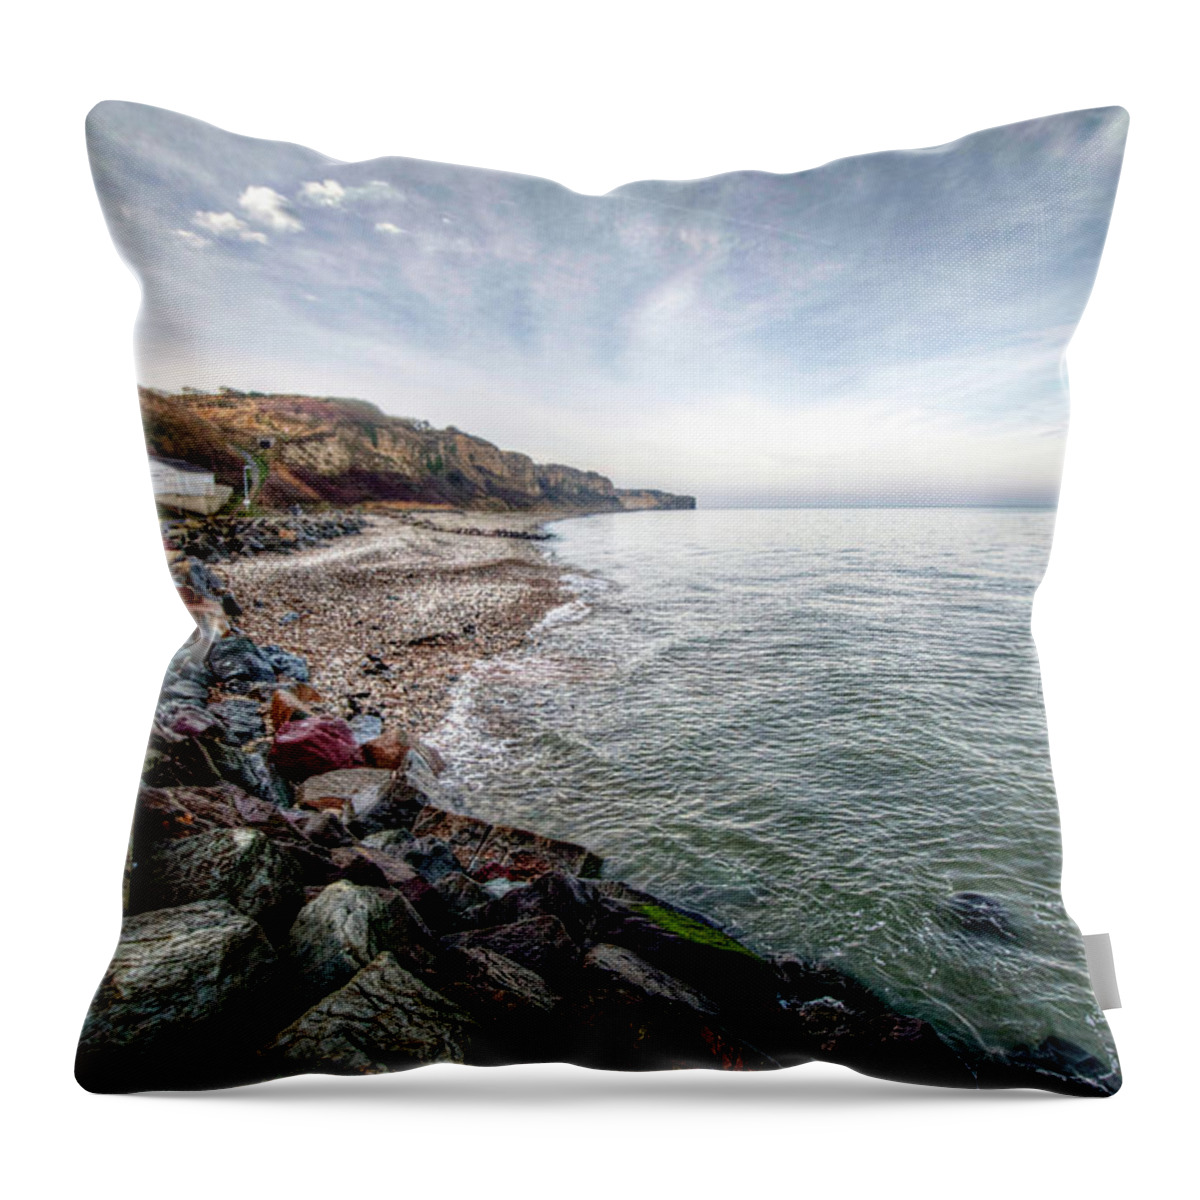 D Day Beaches Normandy France Throw Pillow featuring the photograph D Day Beaches Normandy France #4 by Paul James Bannerman